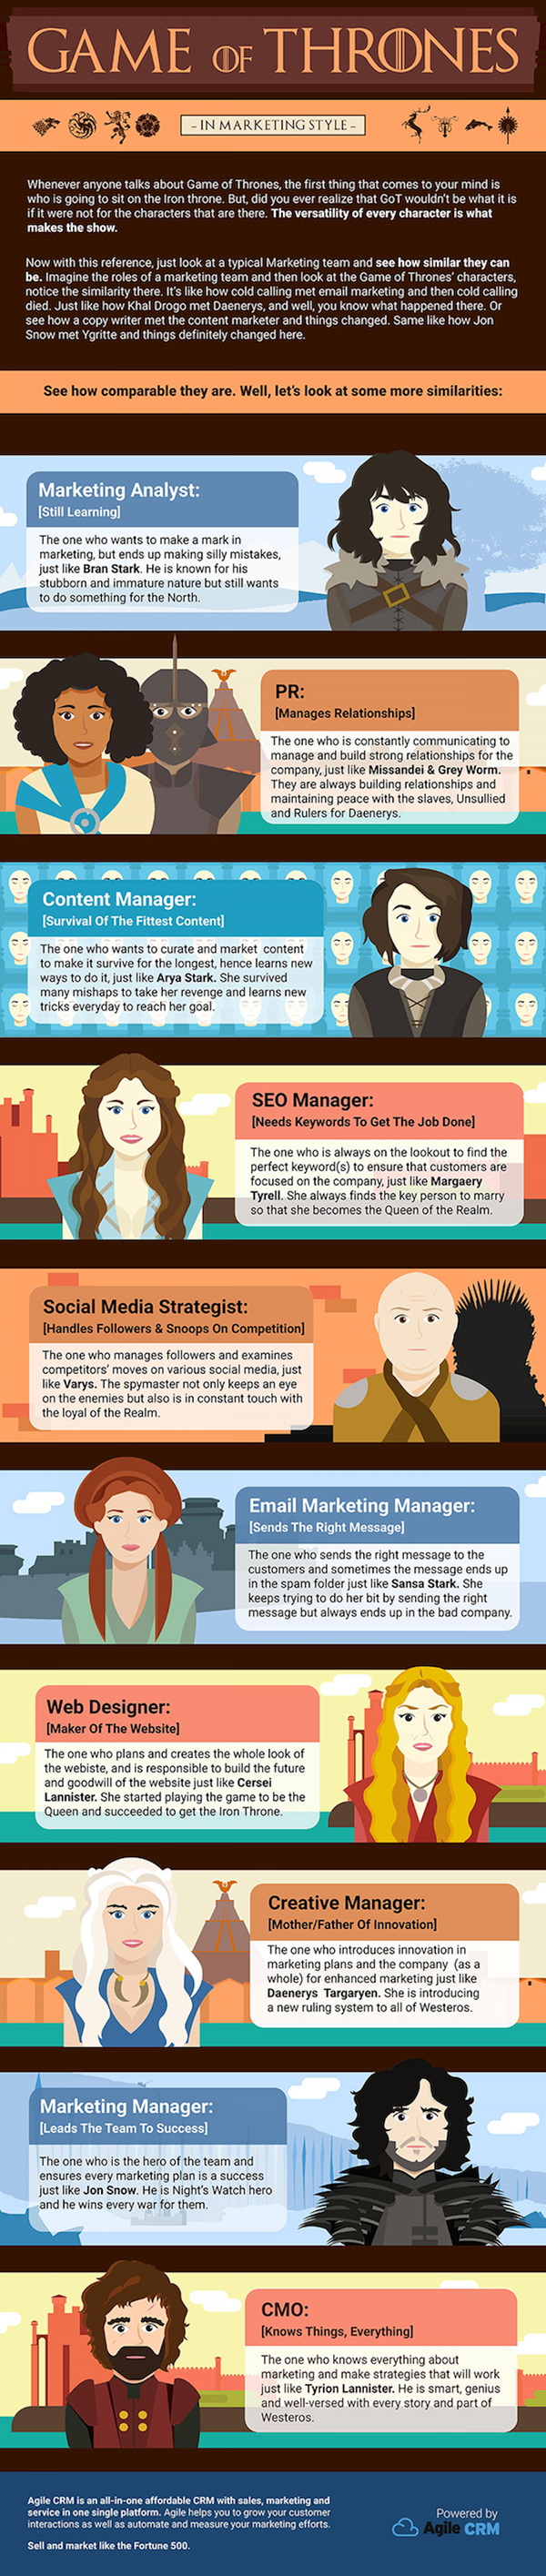 Game of Thrones social media lessons EJP Marketing Co